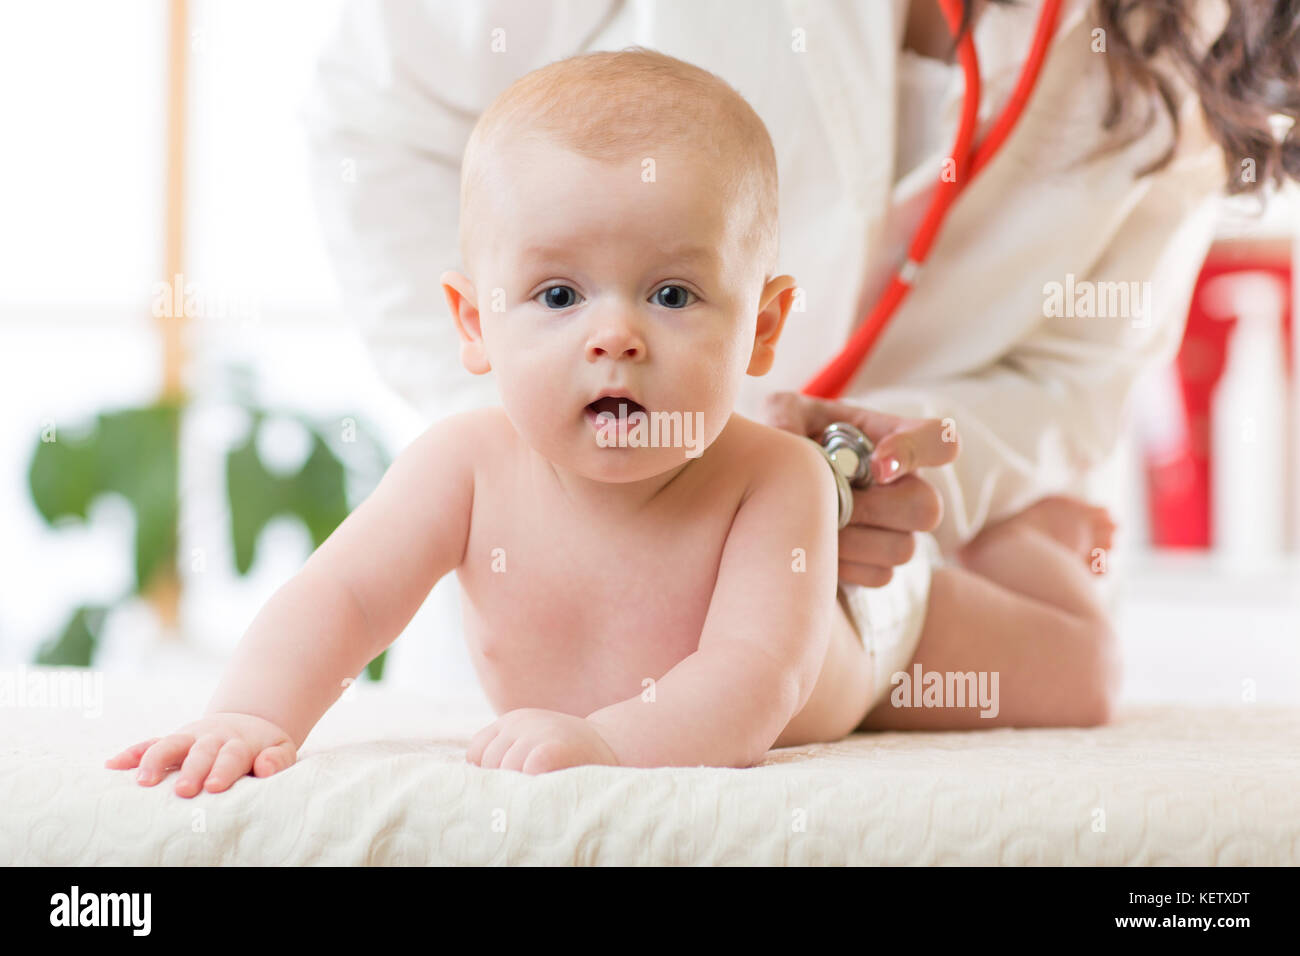 Pediatrician examines newborn baby boy. Doctor using a stethoscope to listen to child's back checking heart beat. Kid is looking at camera. Stock Photo